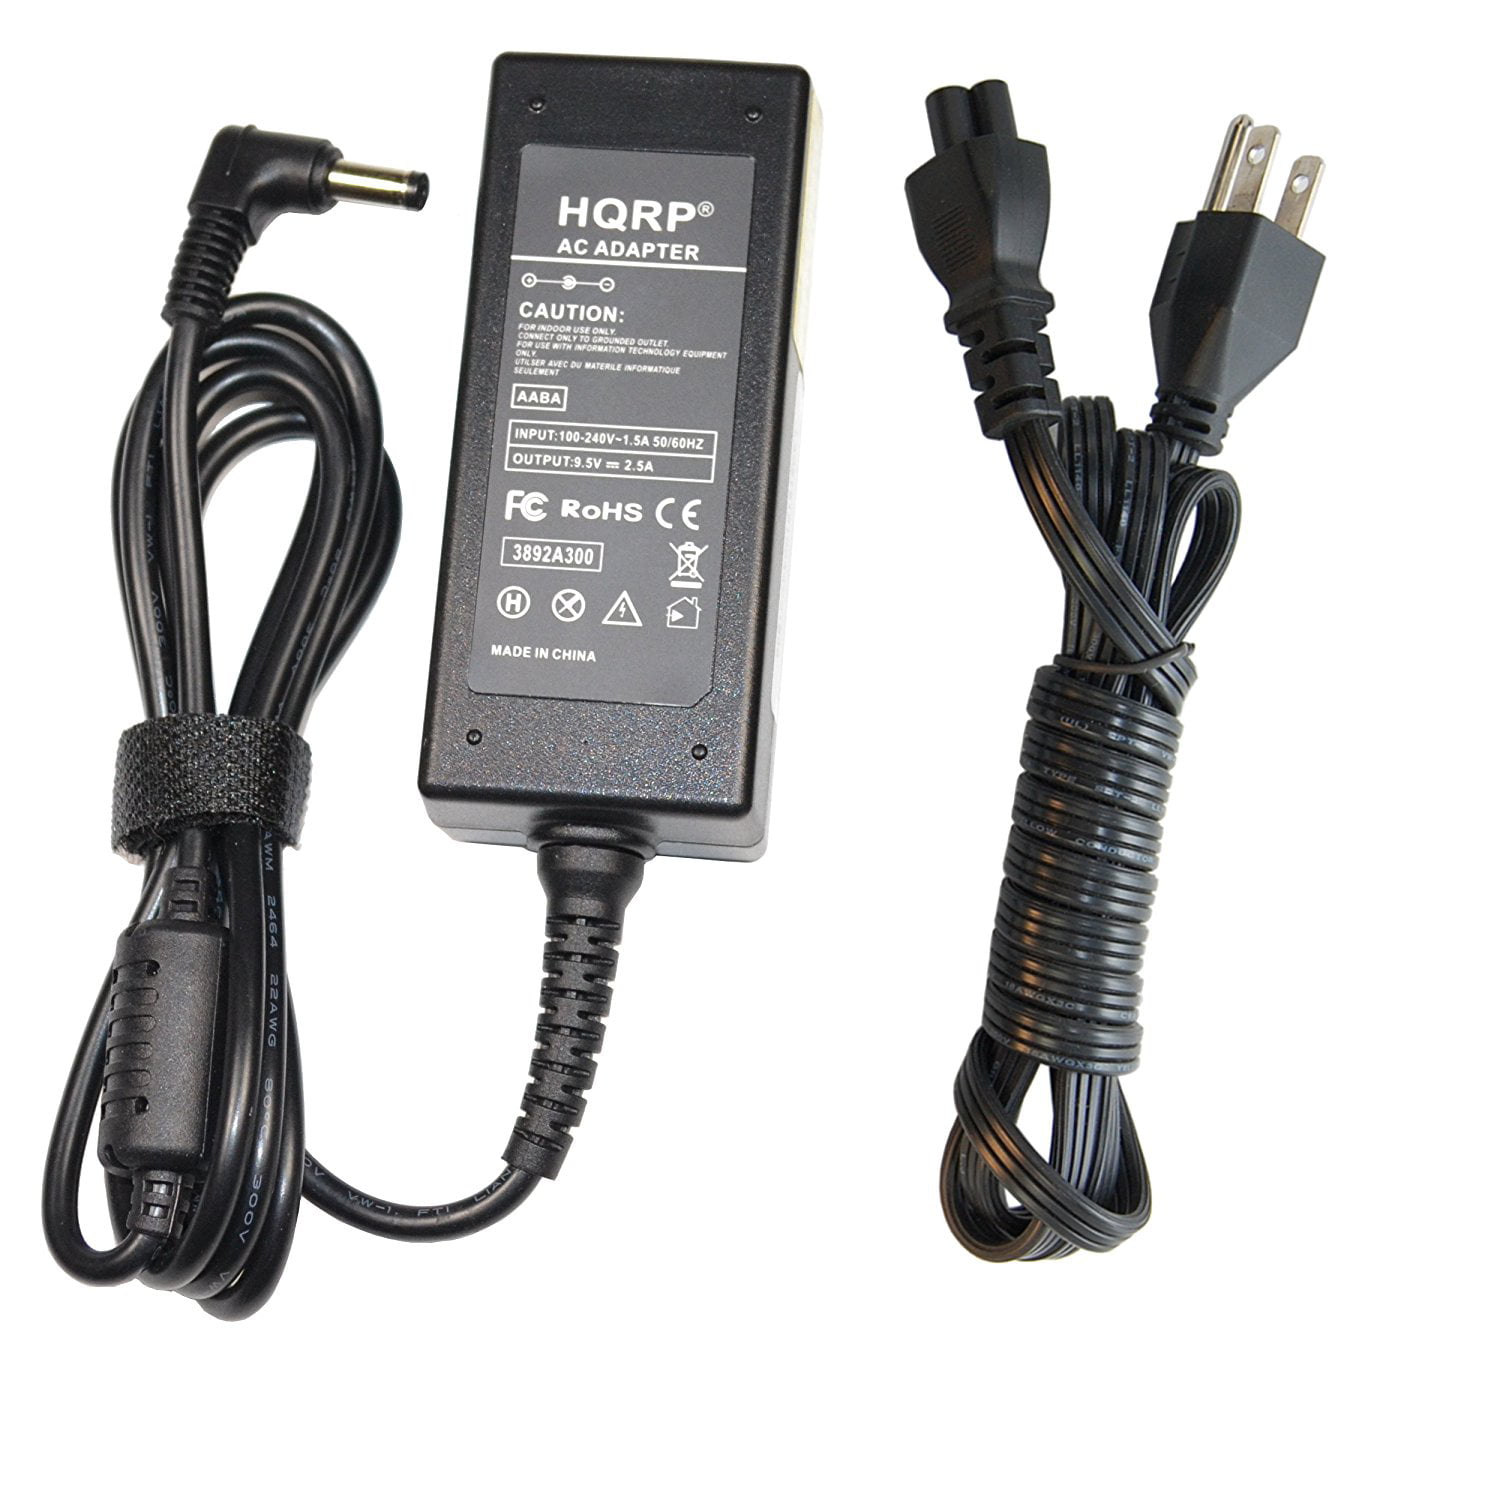 yan Car Charger+AC/DC Power Adapter Cord for Epson Media Player P-2000 P-2500 P-6000